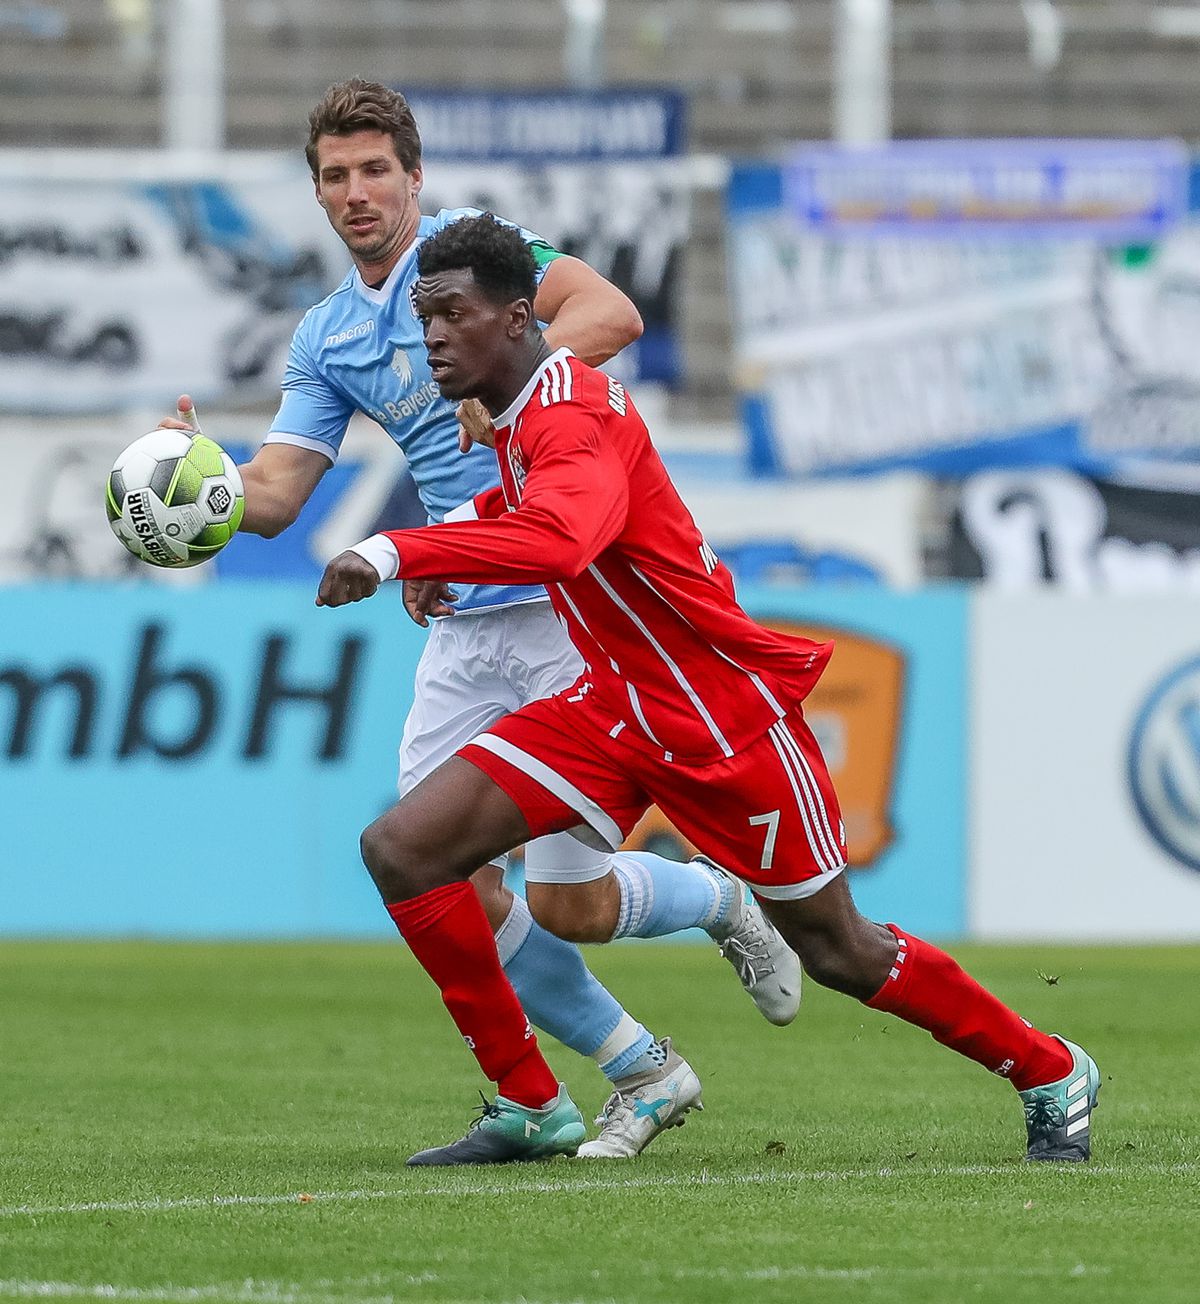 Jan Mauersberger of 1860 Muenchen and Kwasi Okyere Wriedt of Bayern Muenchen battle for the ball during the match between TSV 1860 Muenchen and Bayern Muenchen II at Stadion an der Grünwalder Straße on October 22, 2017 in Munich, Germany.